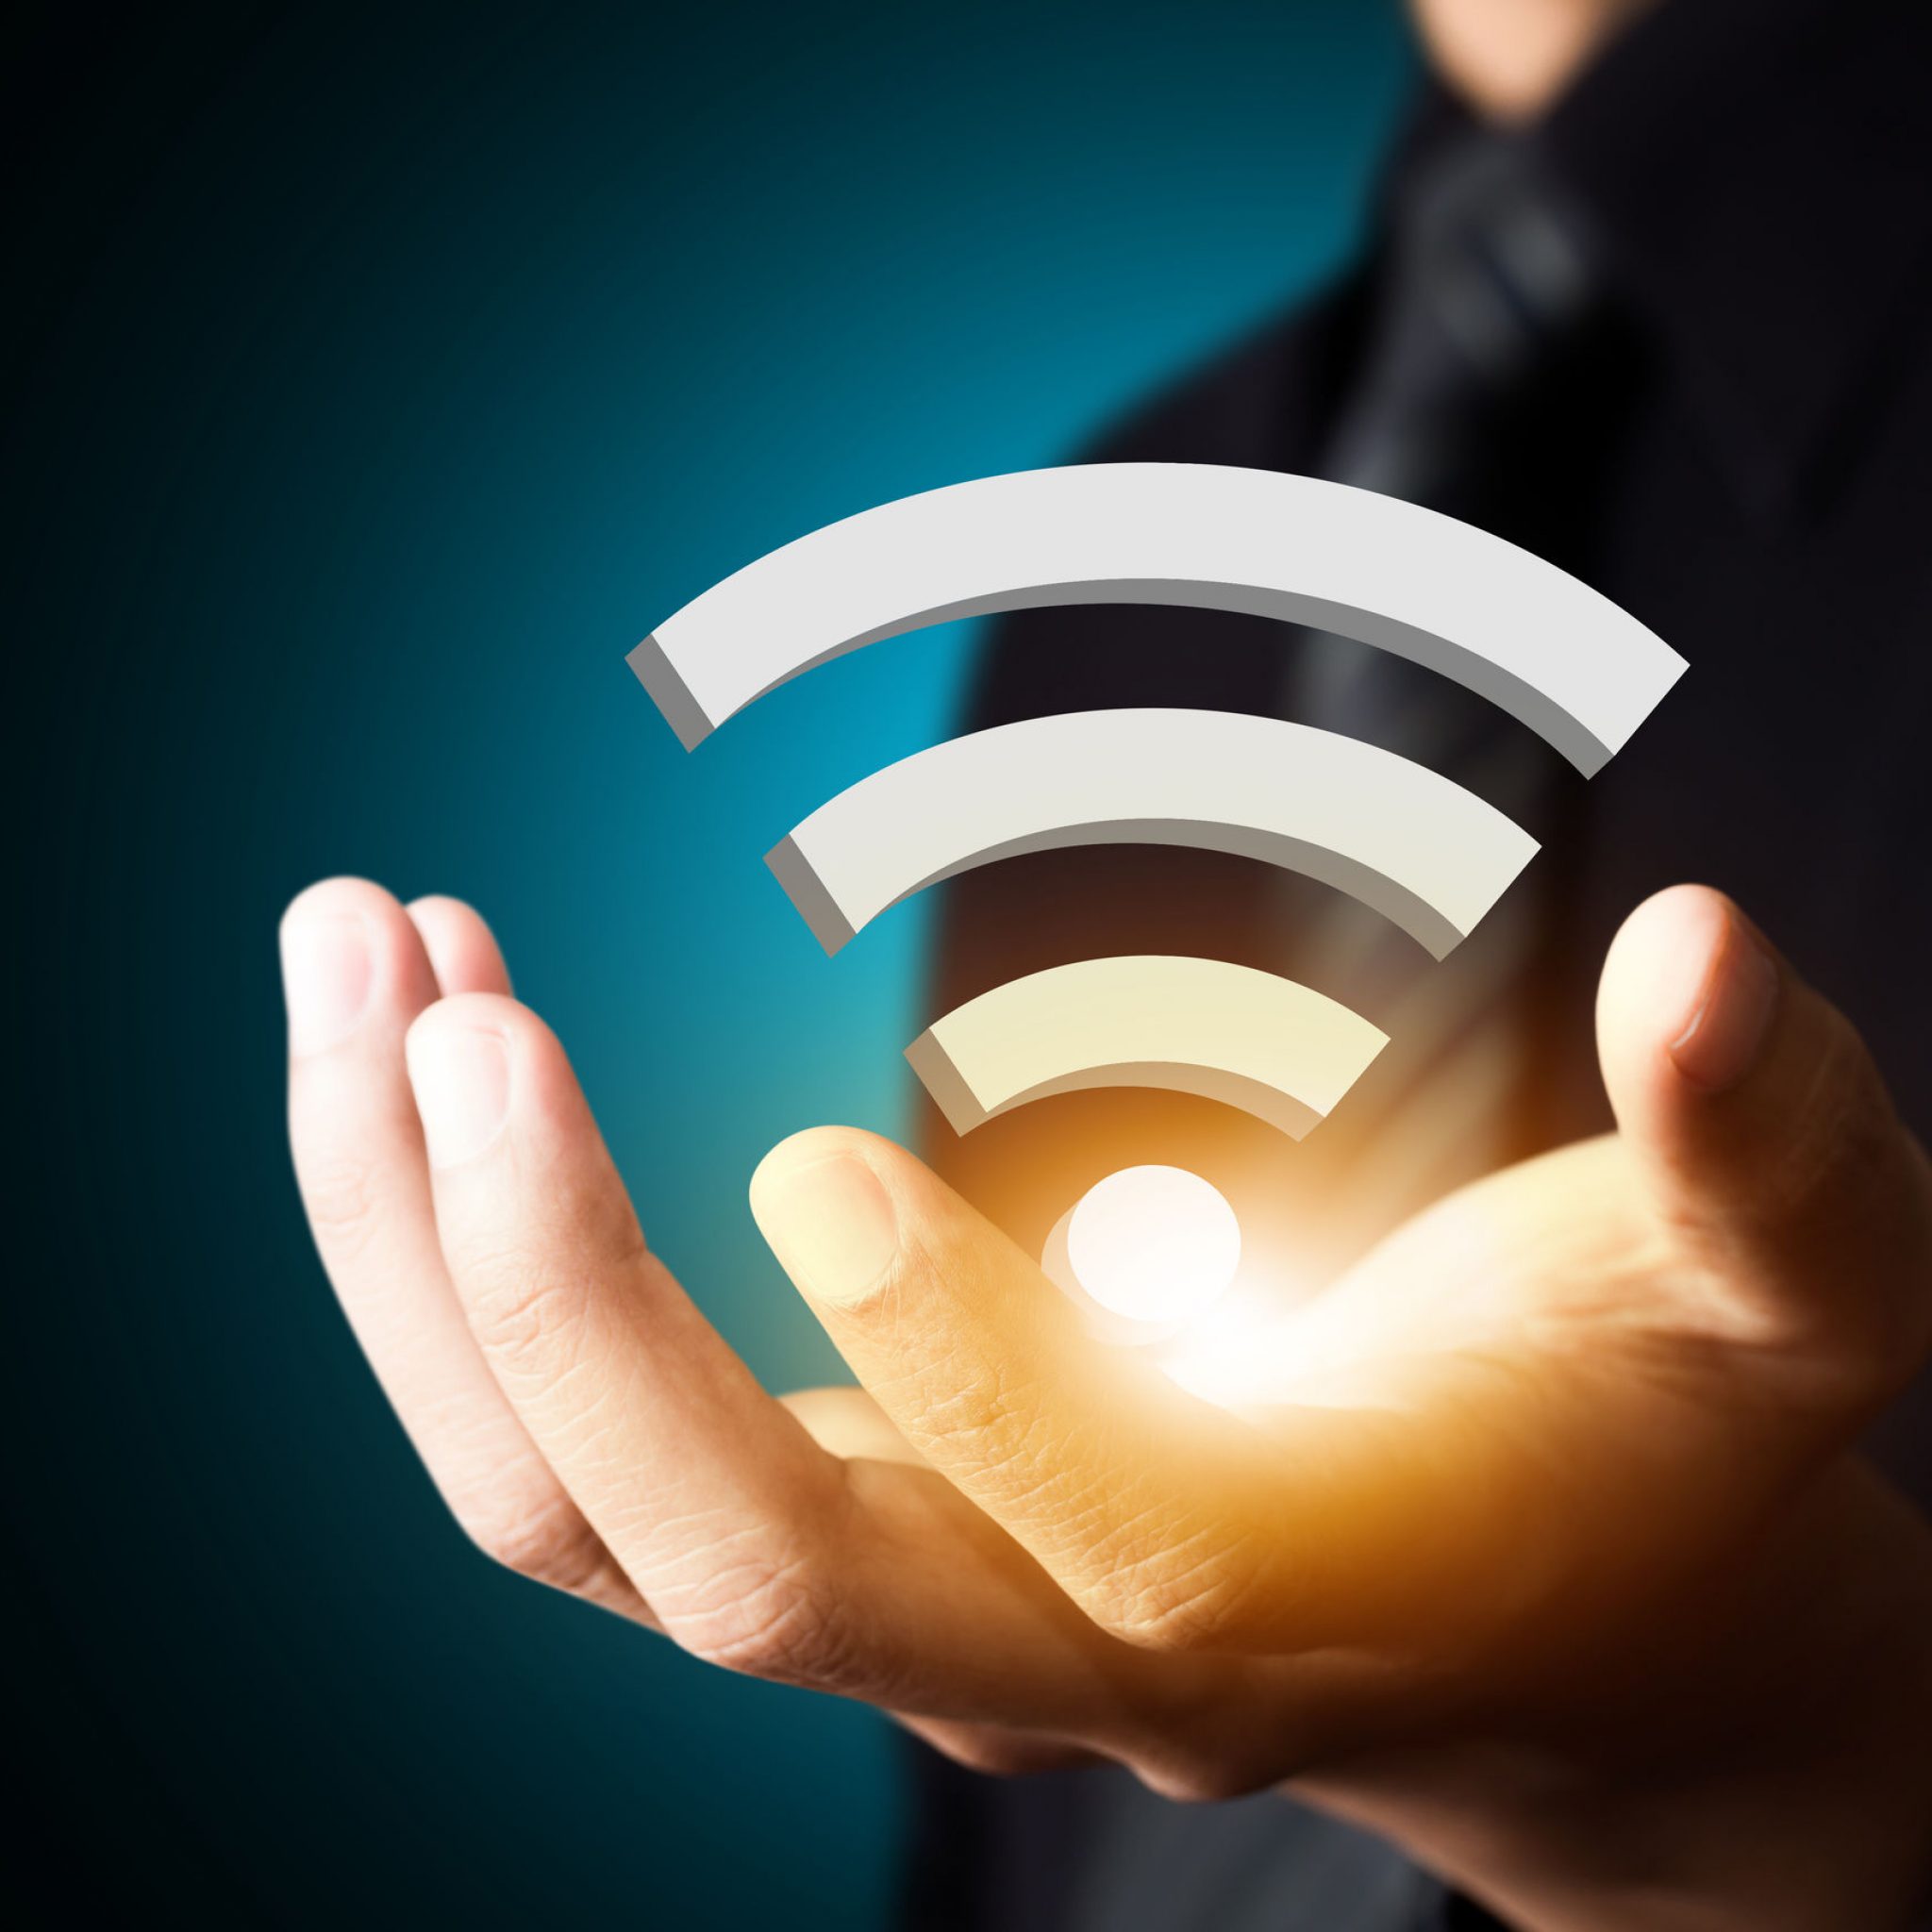 WiFi 7 demand spikes ahead of launch